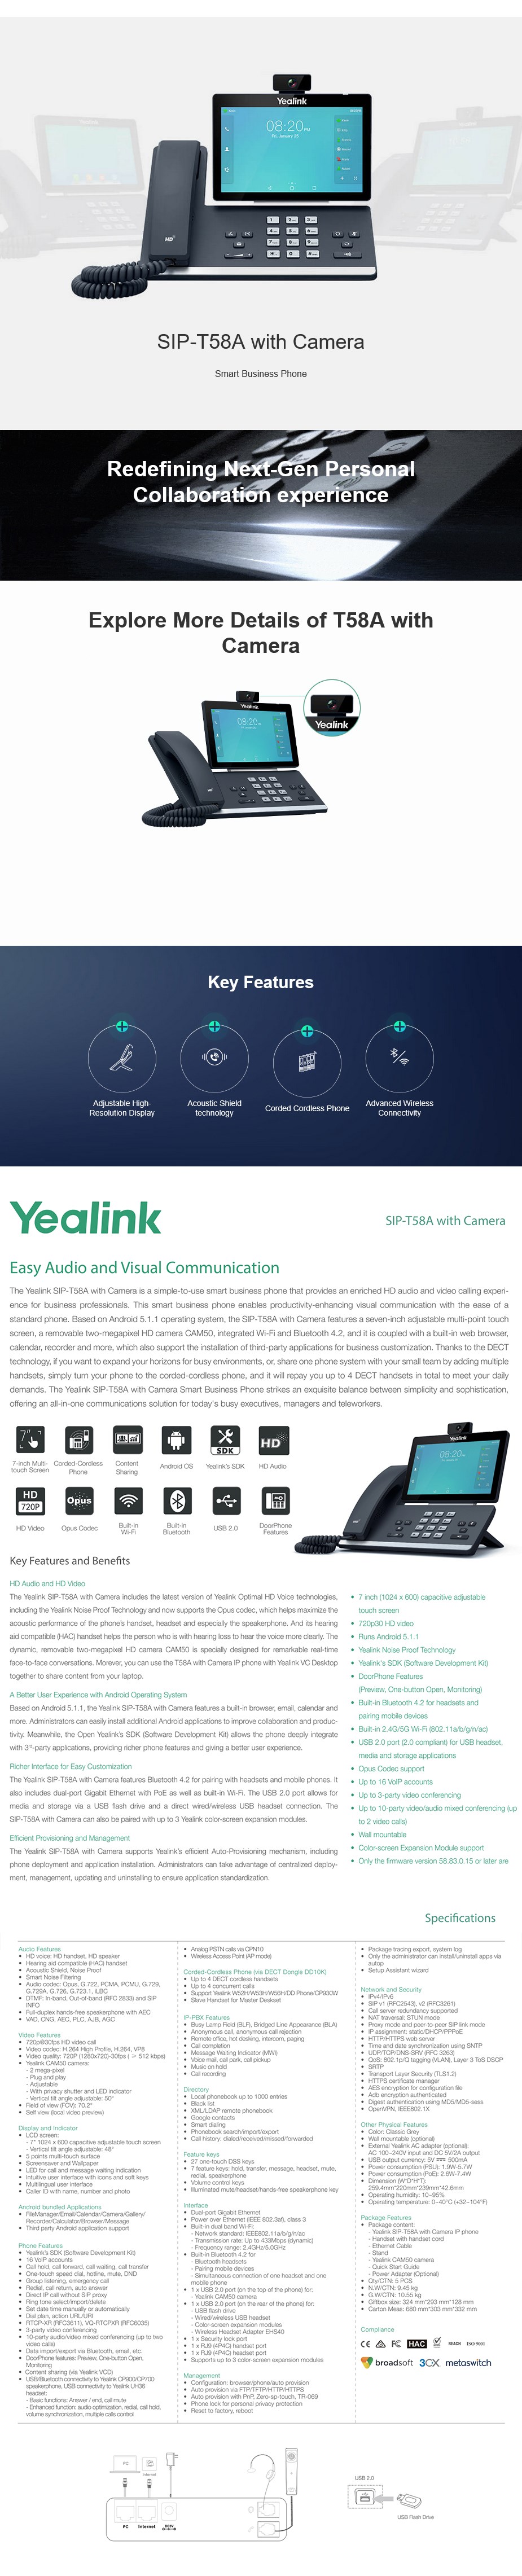 Yealink SIP-T58A-C 16-Line IP HD Smart Business Phone with Camera CX  Computer Superstore